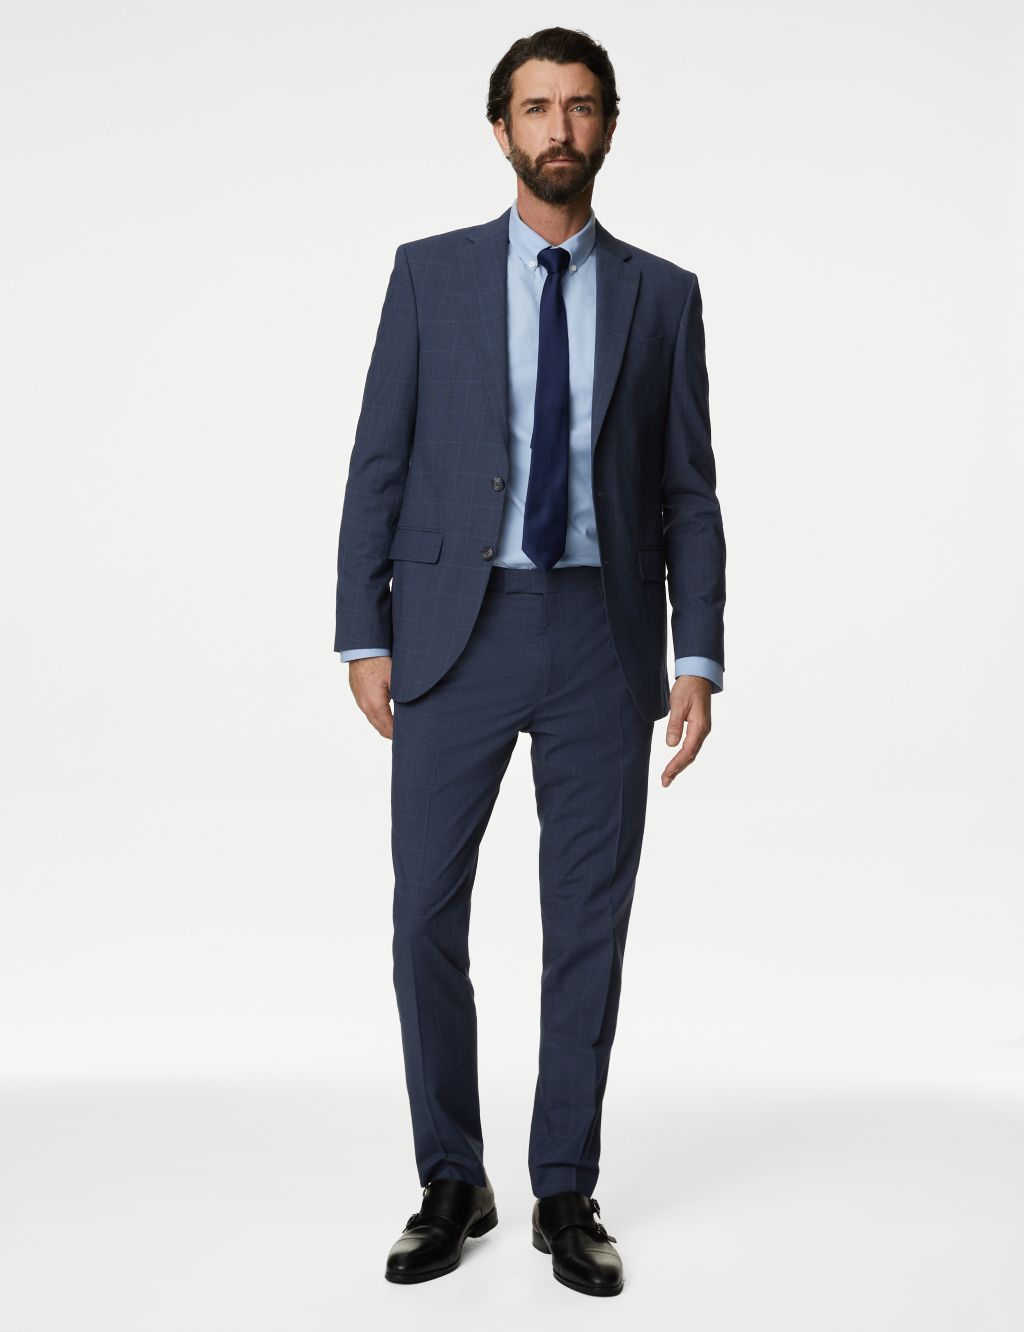 Slim Fit Prince of Wales Check Suit image 1